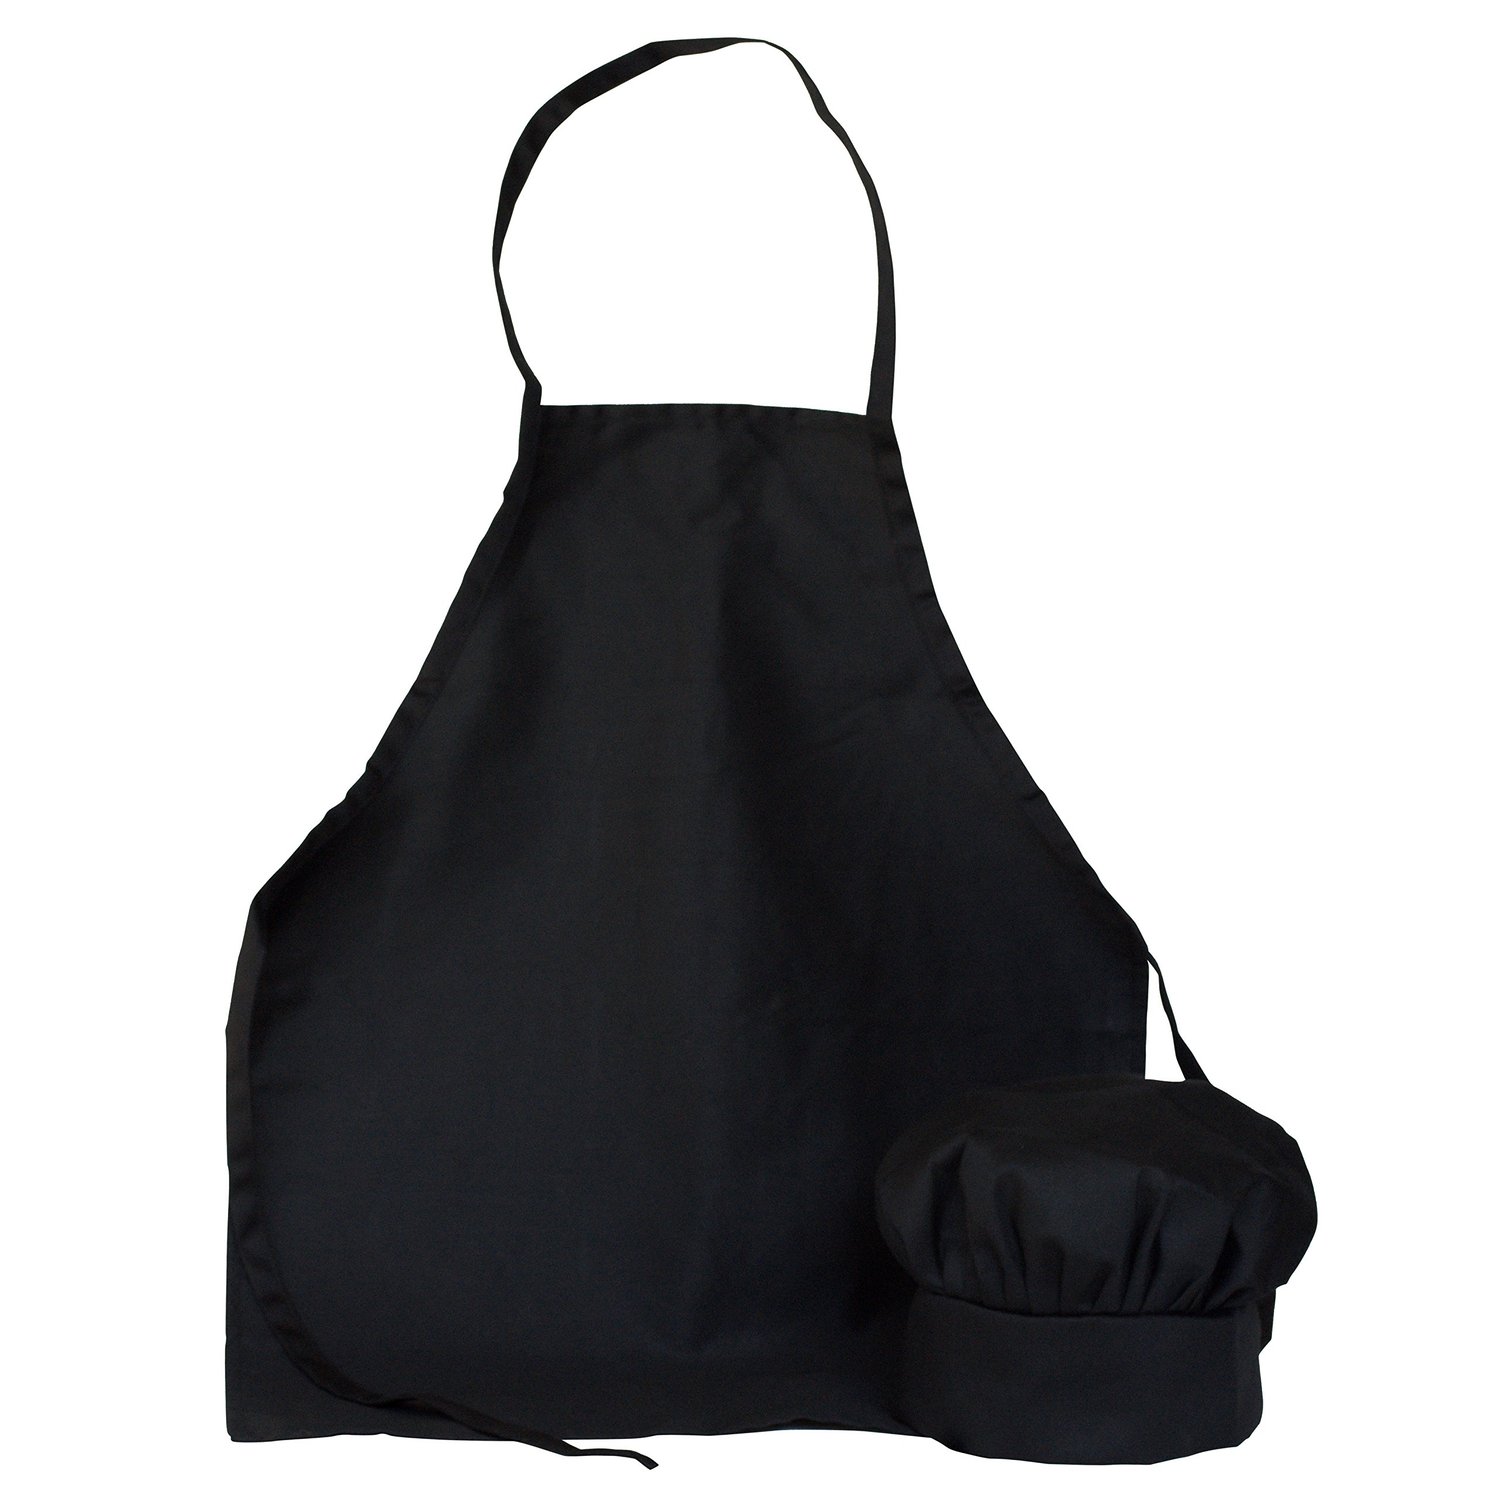 ObviousChef's chef apron + hat set for kids. ($16)